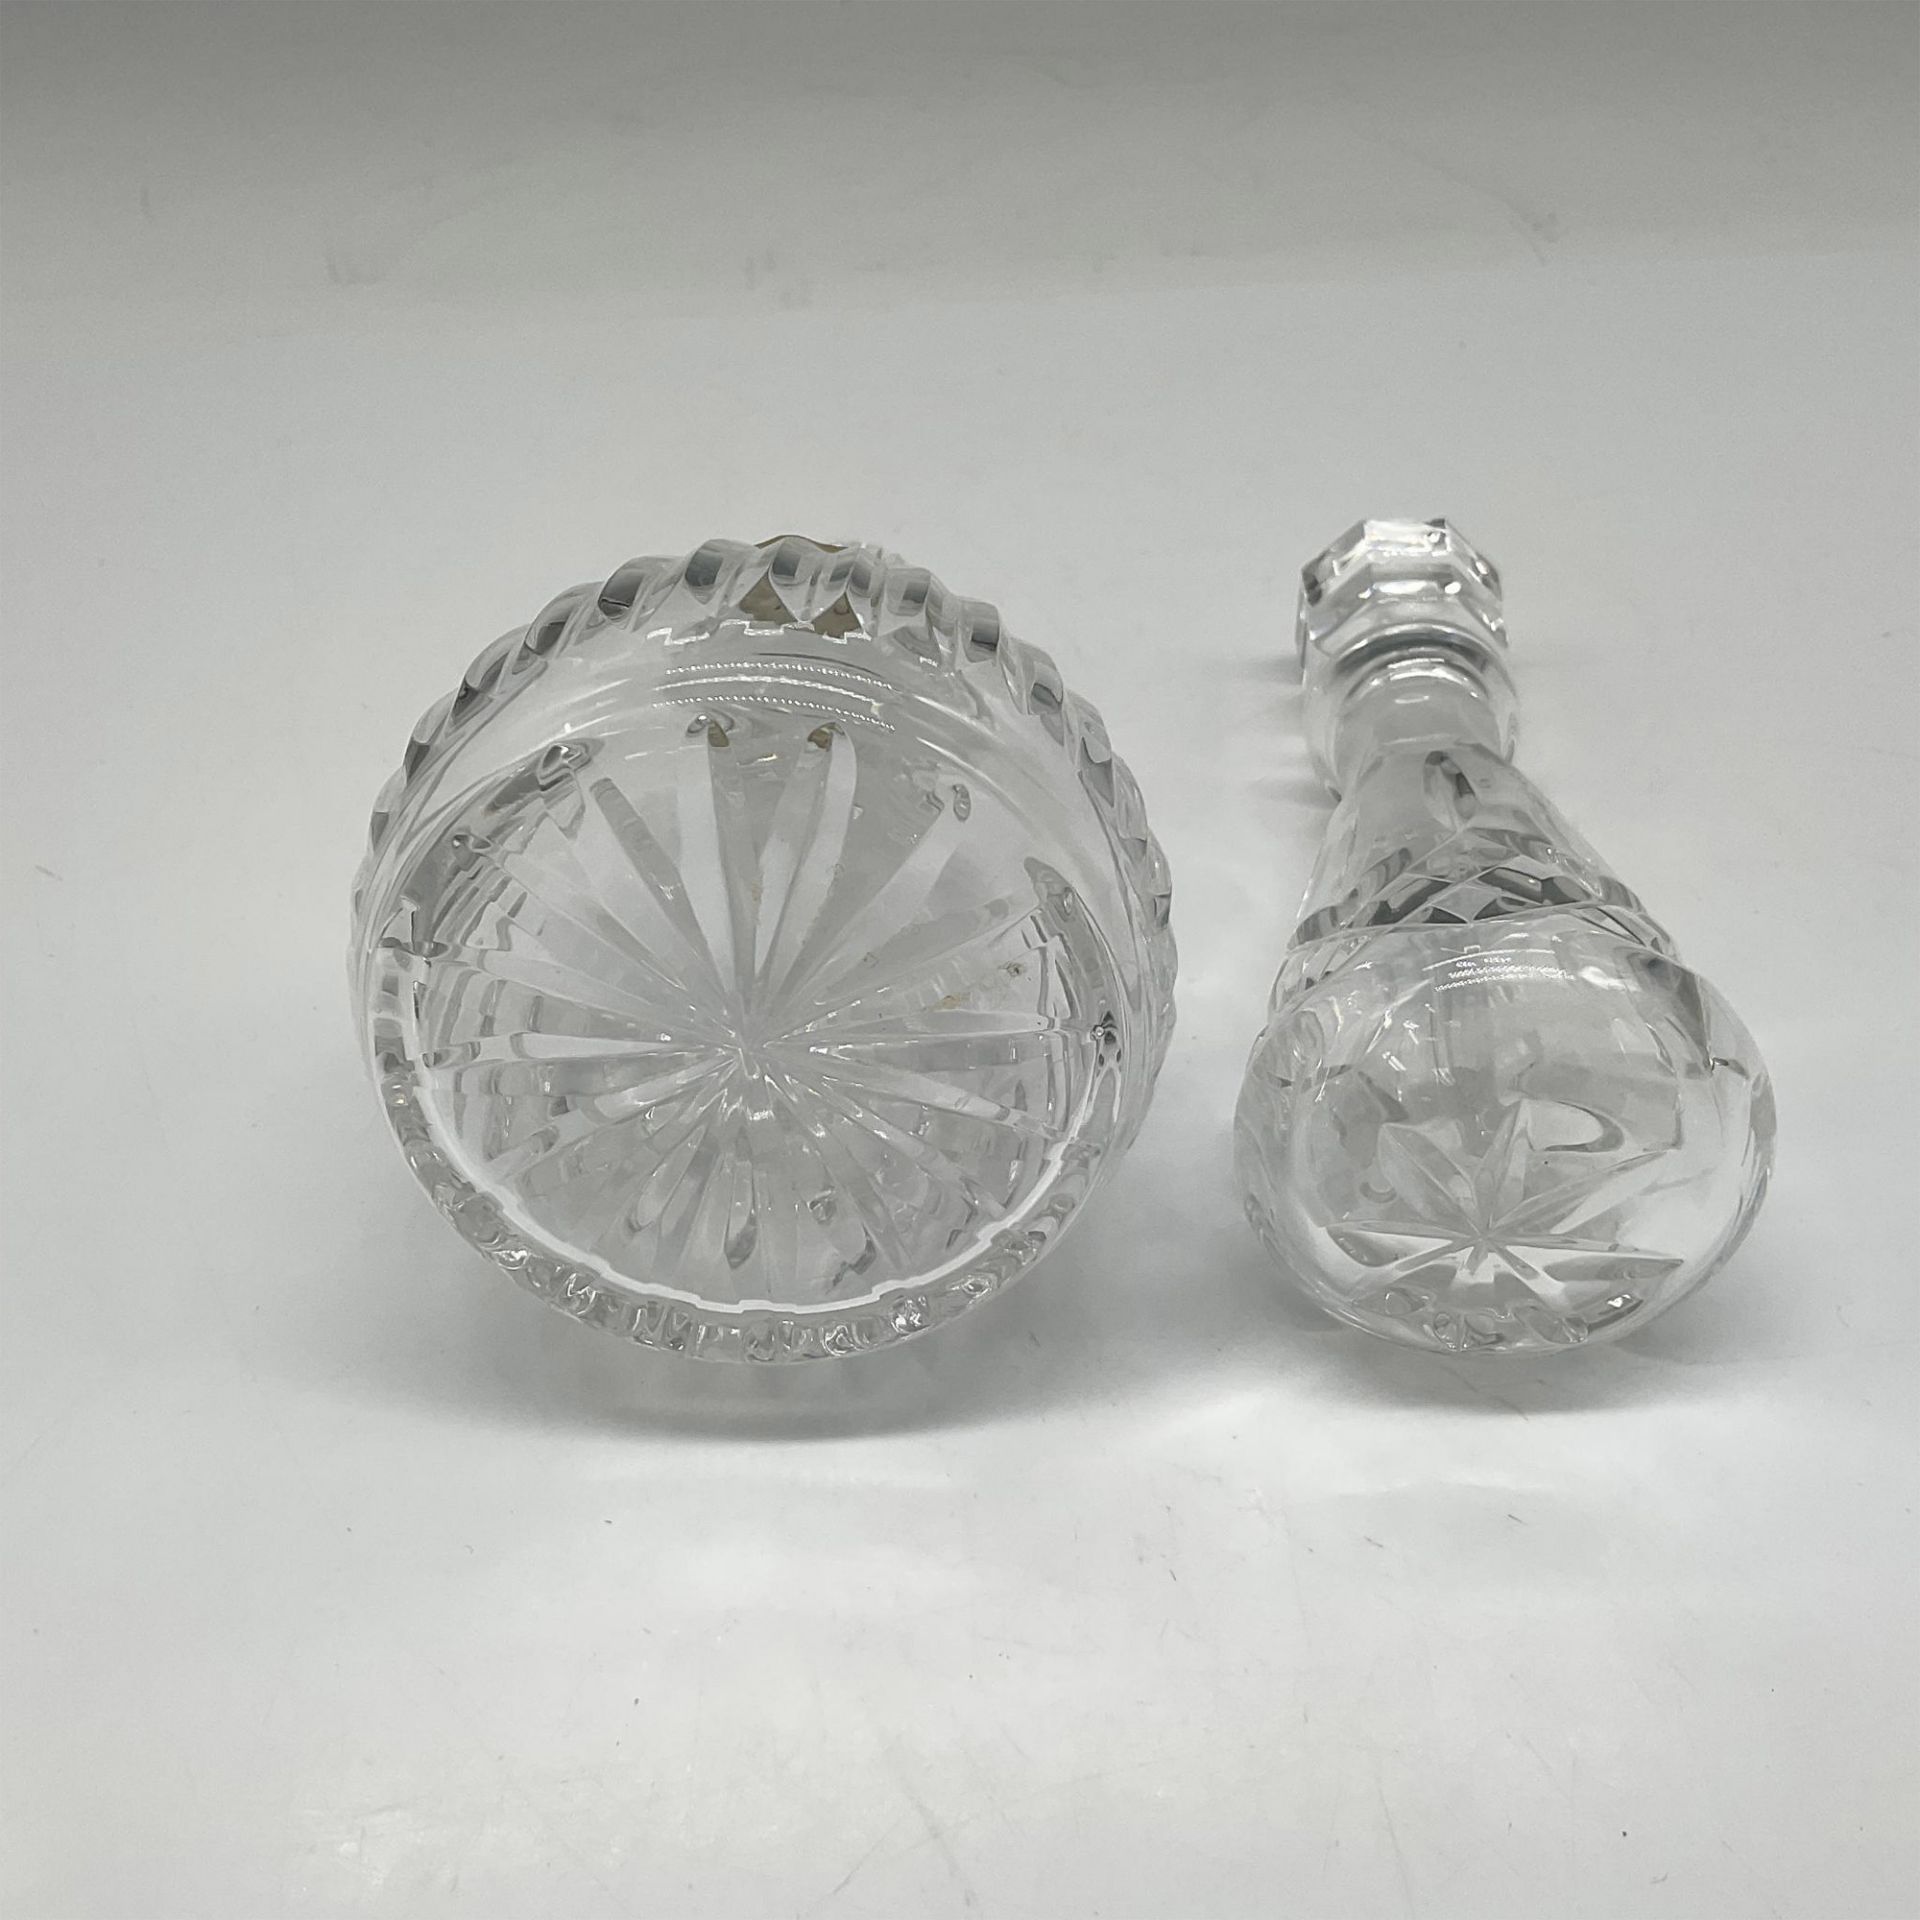 2pc Waterford Crystal Scent Bottles - Image 3 of 3